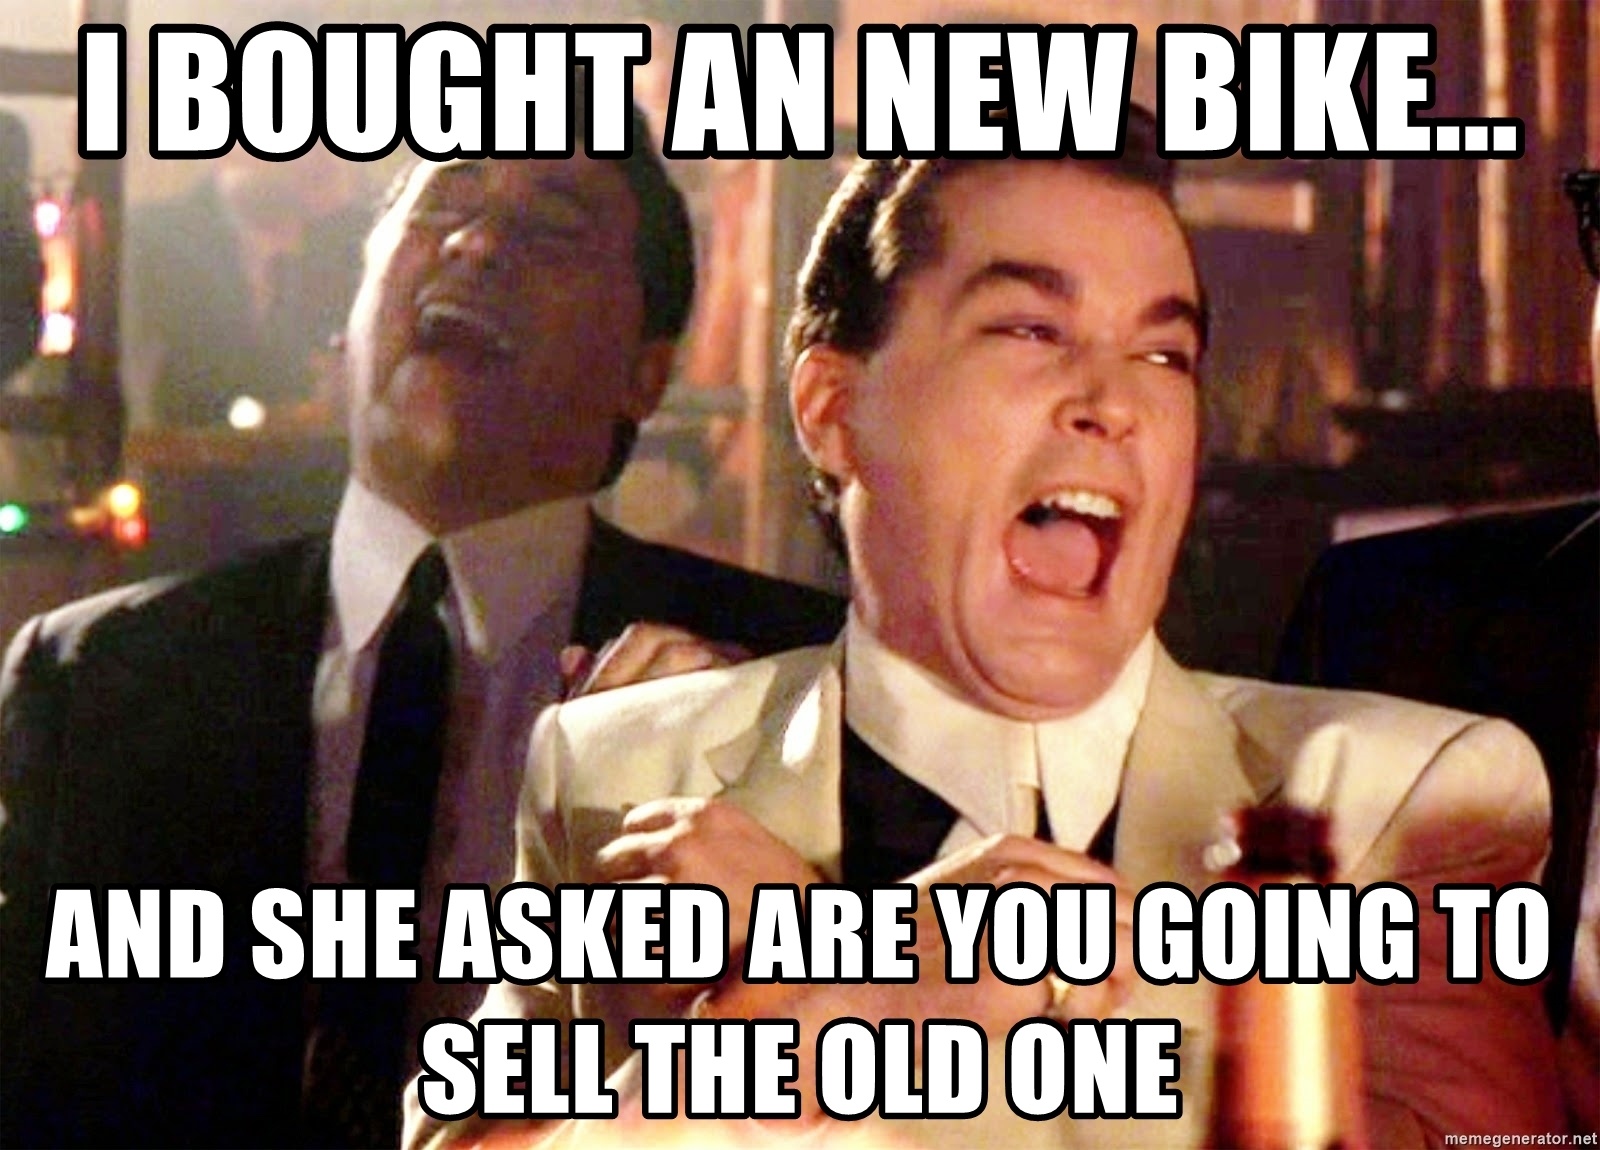 i-bought-an-new-bike-and-she-asked-are-you-going-to-sell-the-old-one.jpg